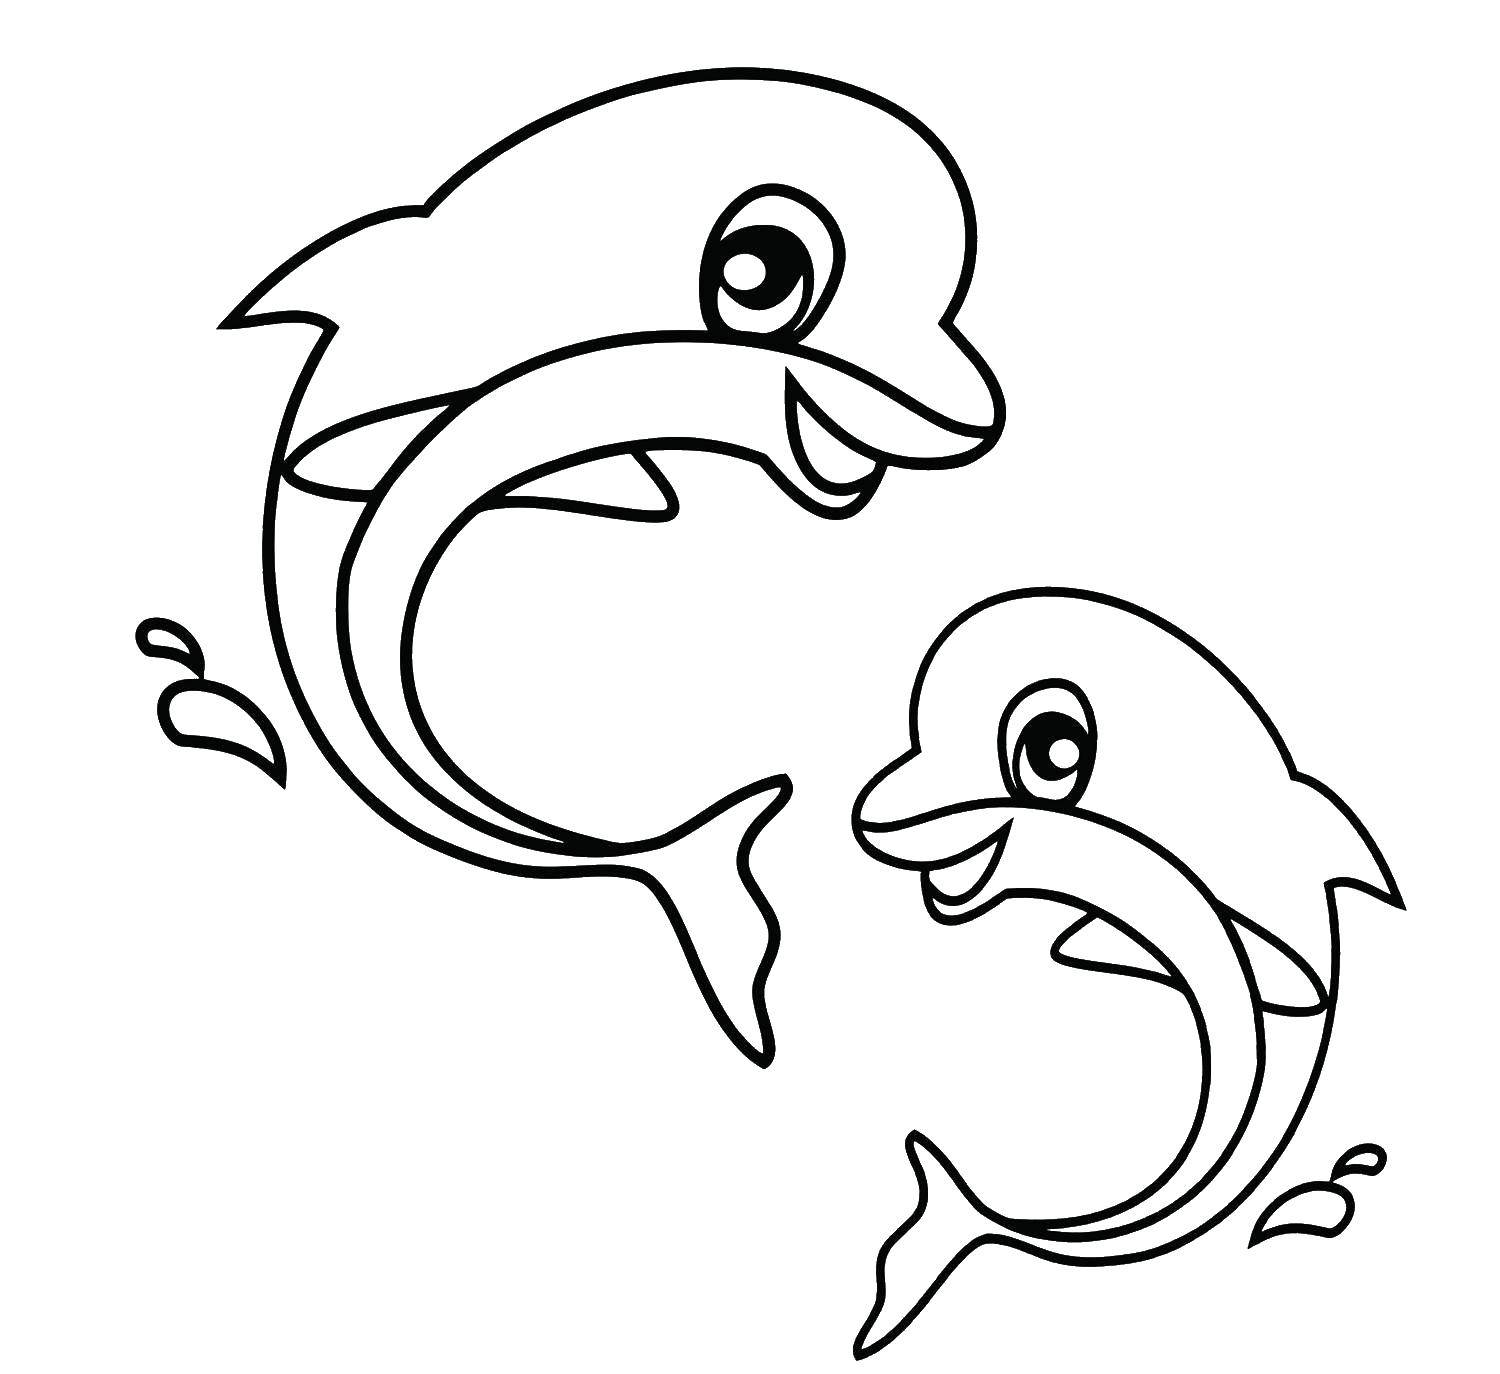 Coloring Two cute Dolphin. Category dolphins. Tags:  dolphins, fish, sea animals, dolphins.